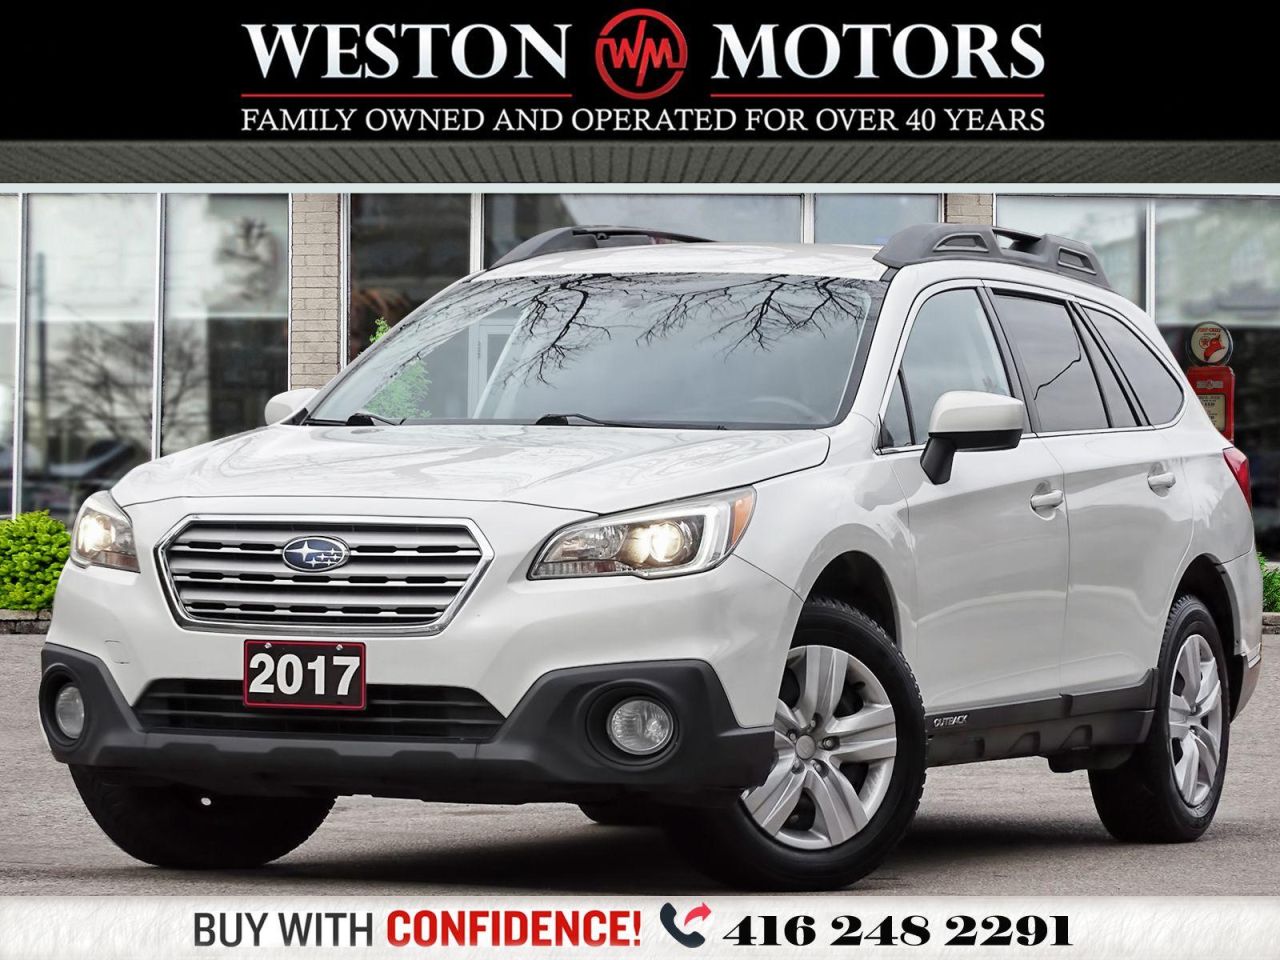 2017 Subaru Outback AWD*HEATED SEATS*REV CAM*BLUETOOTH*PICTURES COMING